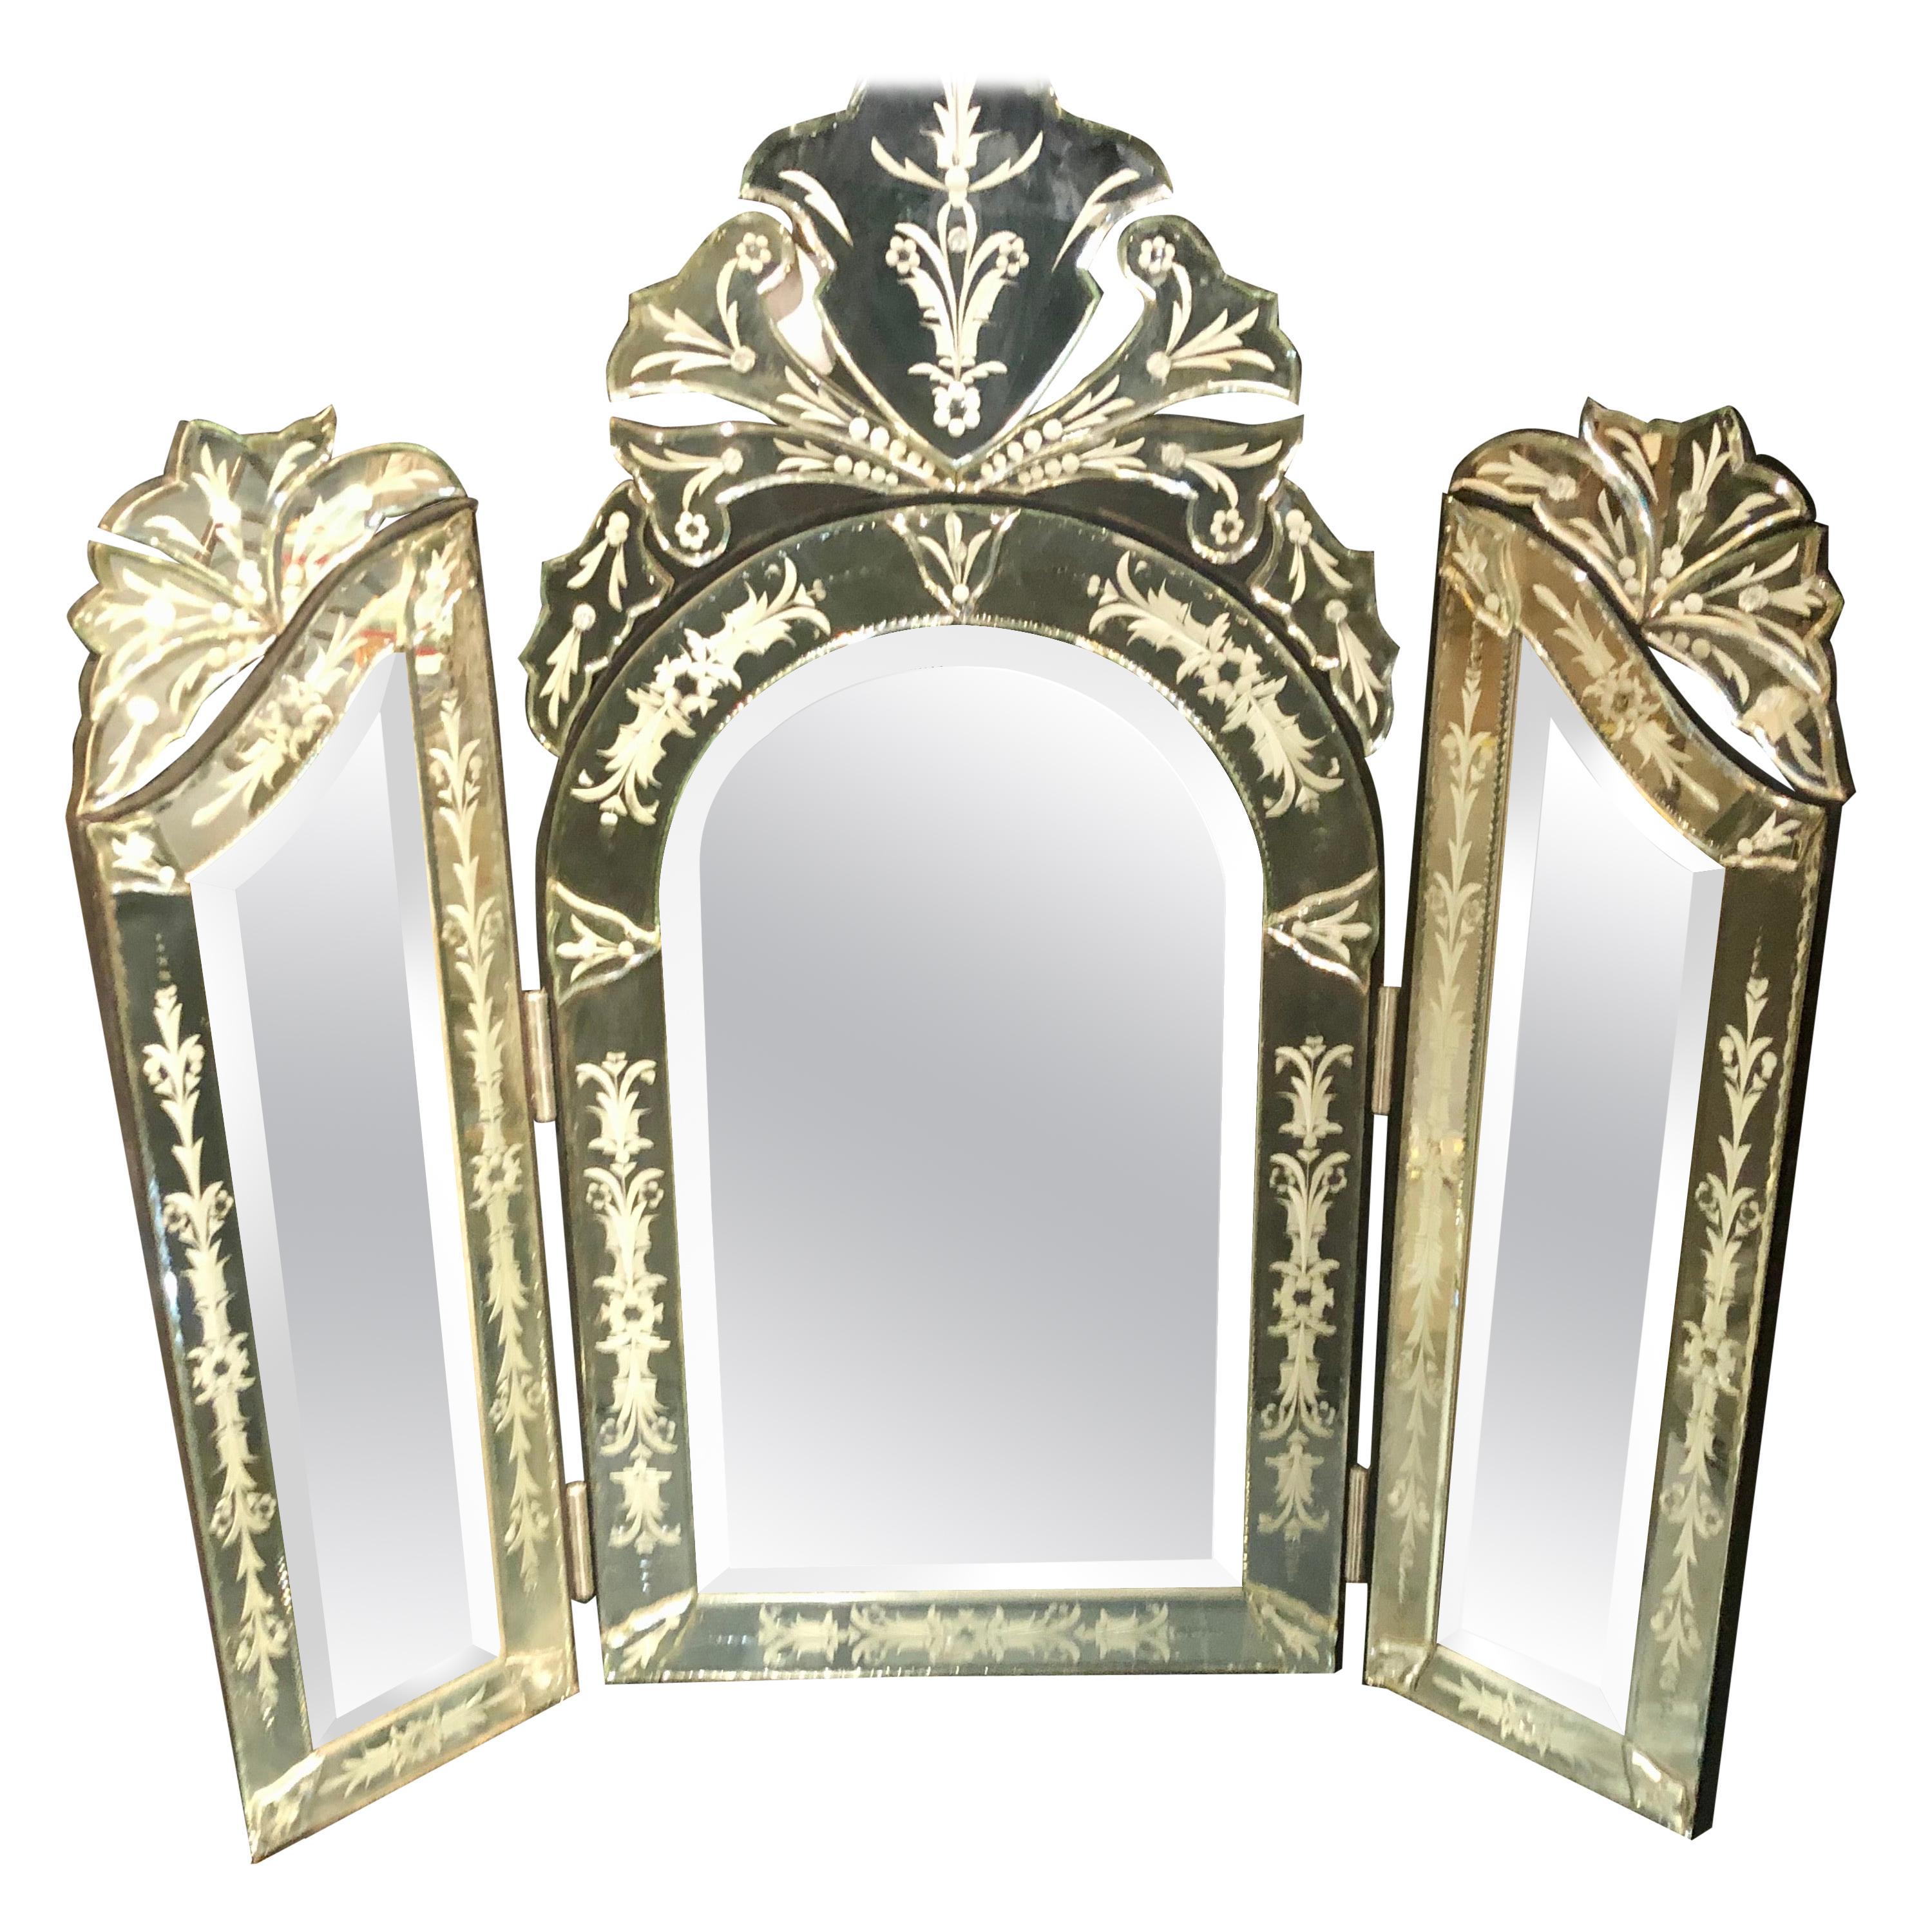 Hollywood Regency Style Tri-Fold Etched Glass Vanity or Table Mirror